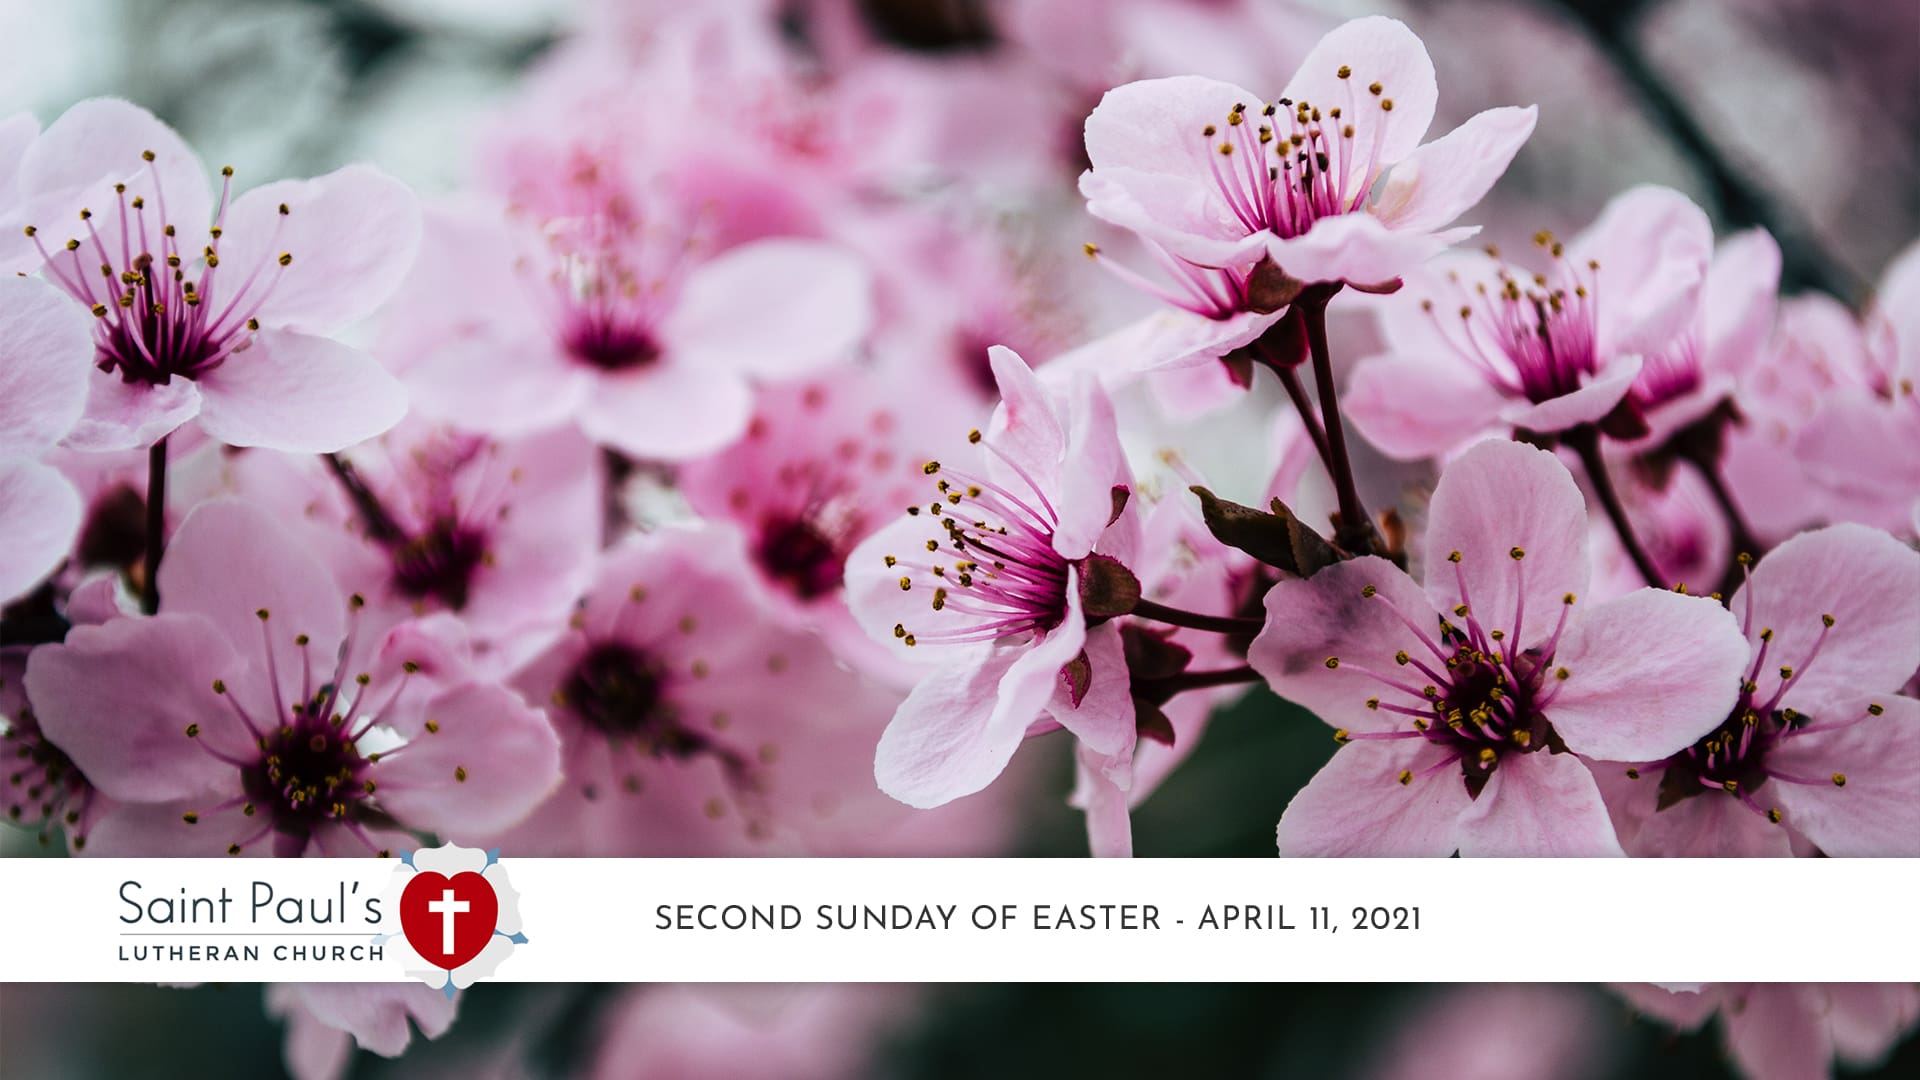 Second Sunday of Easter Service – April 11, 2021